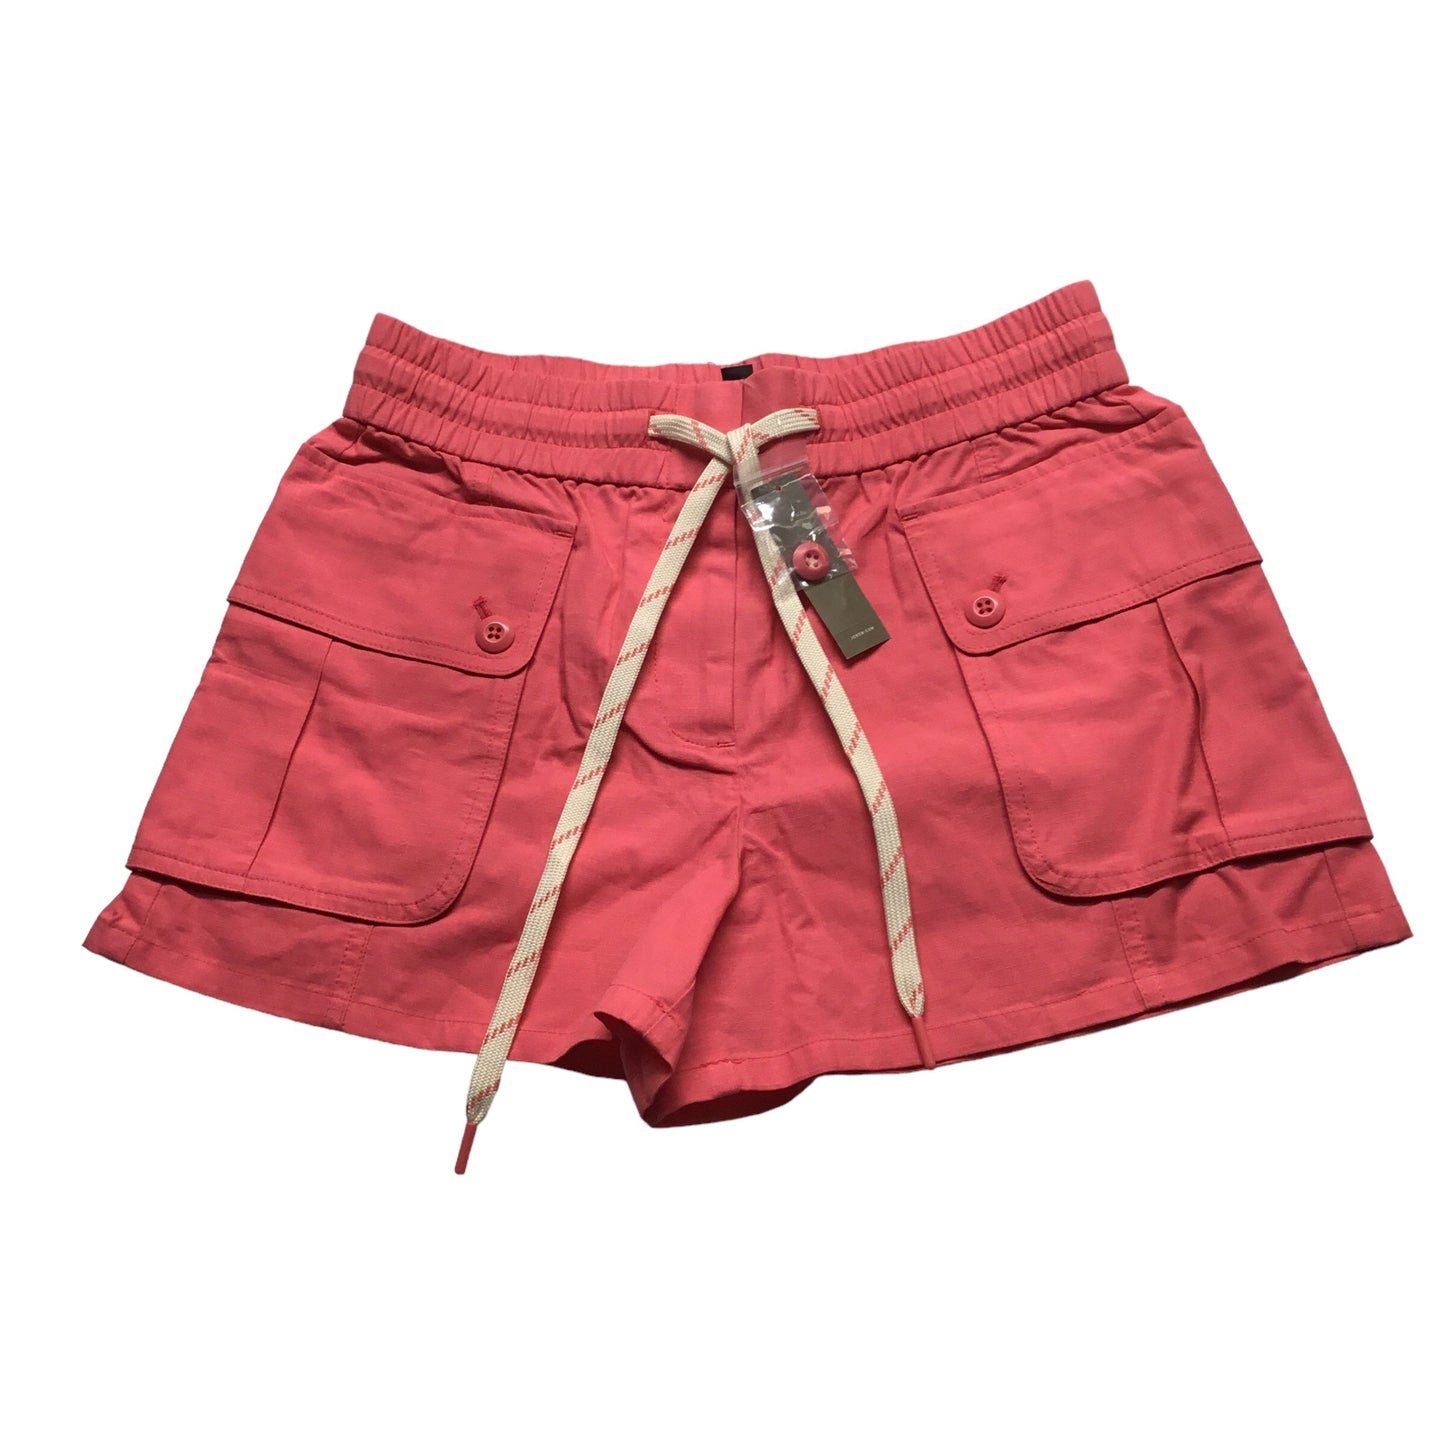 Coral Shorts J. Crew, Size Xs